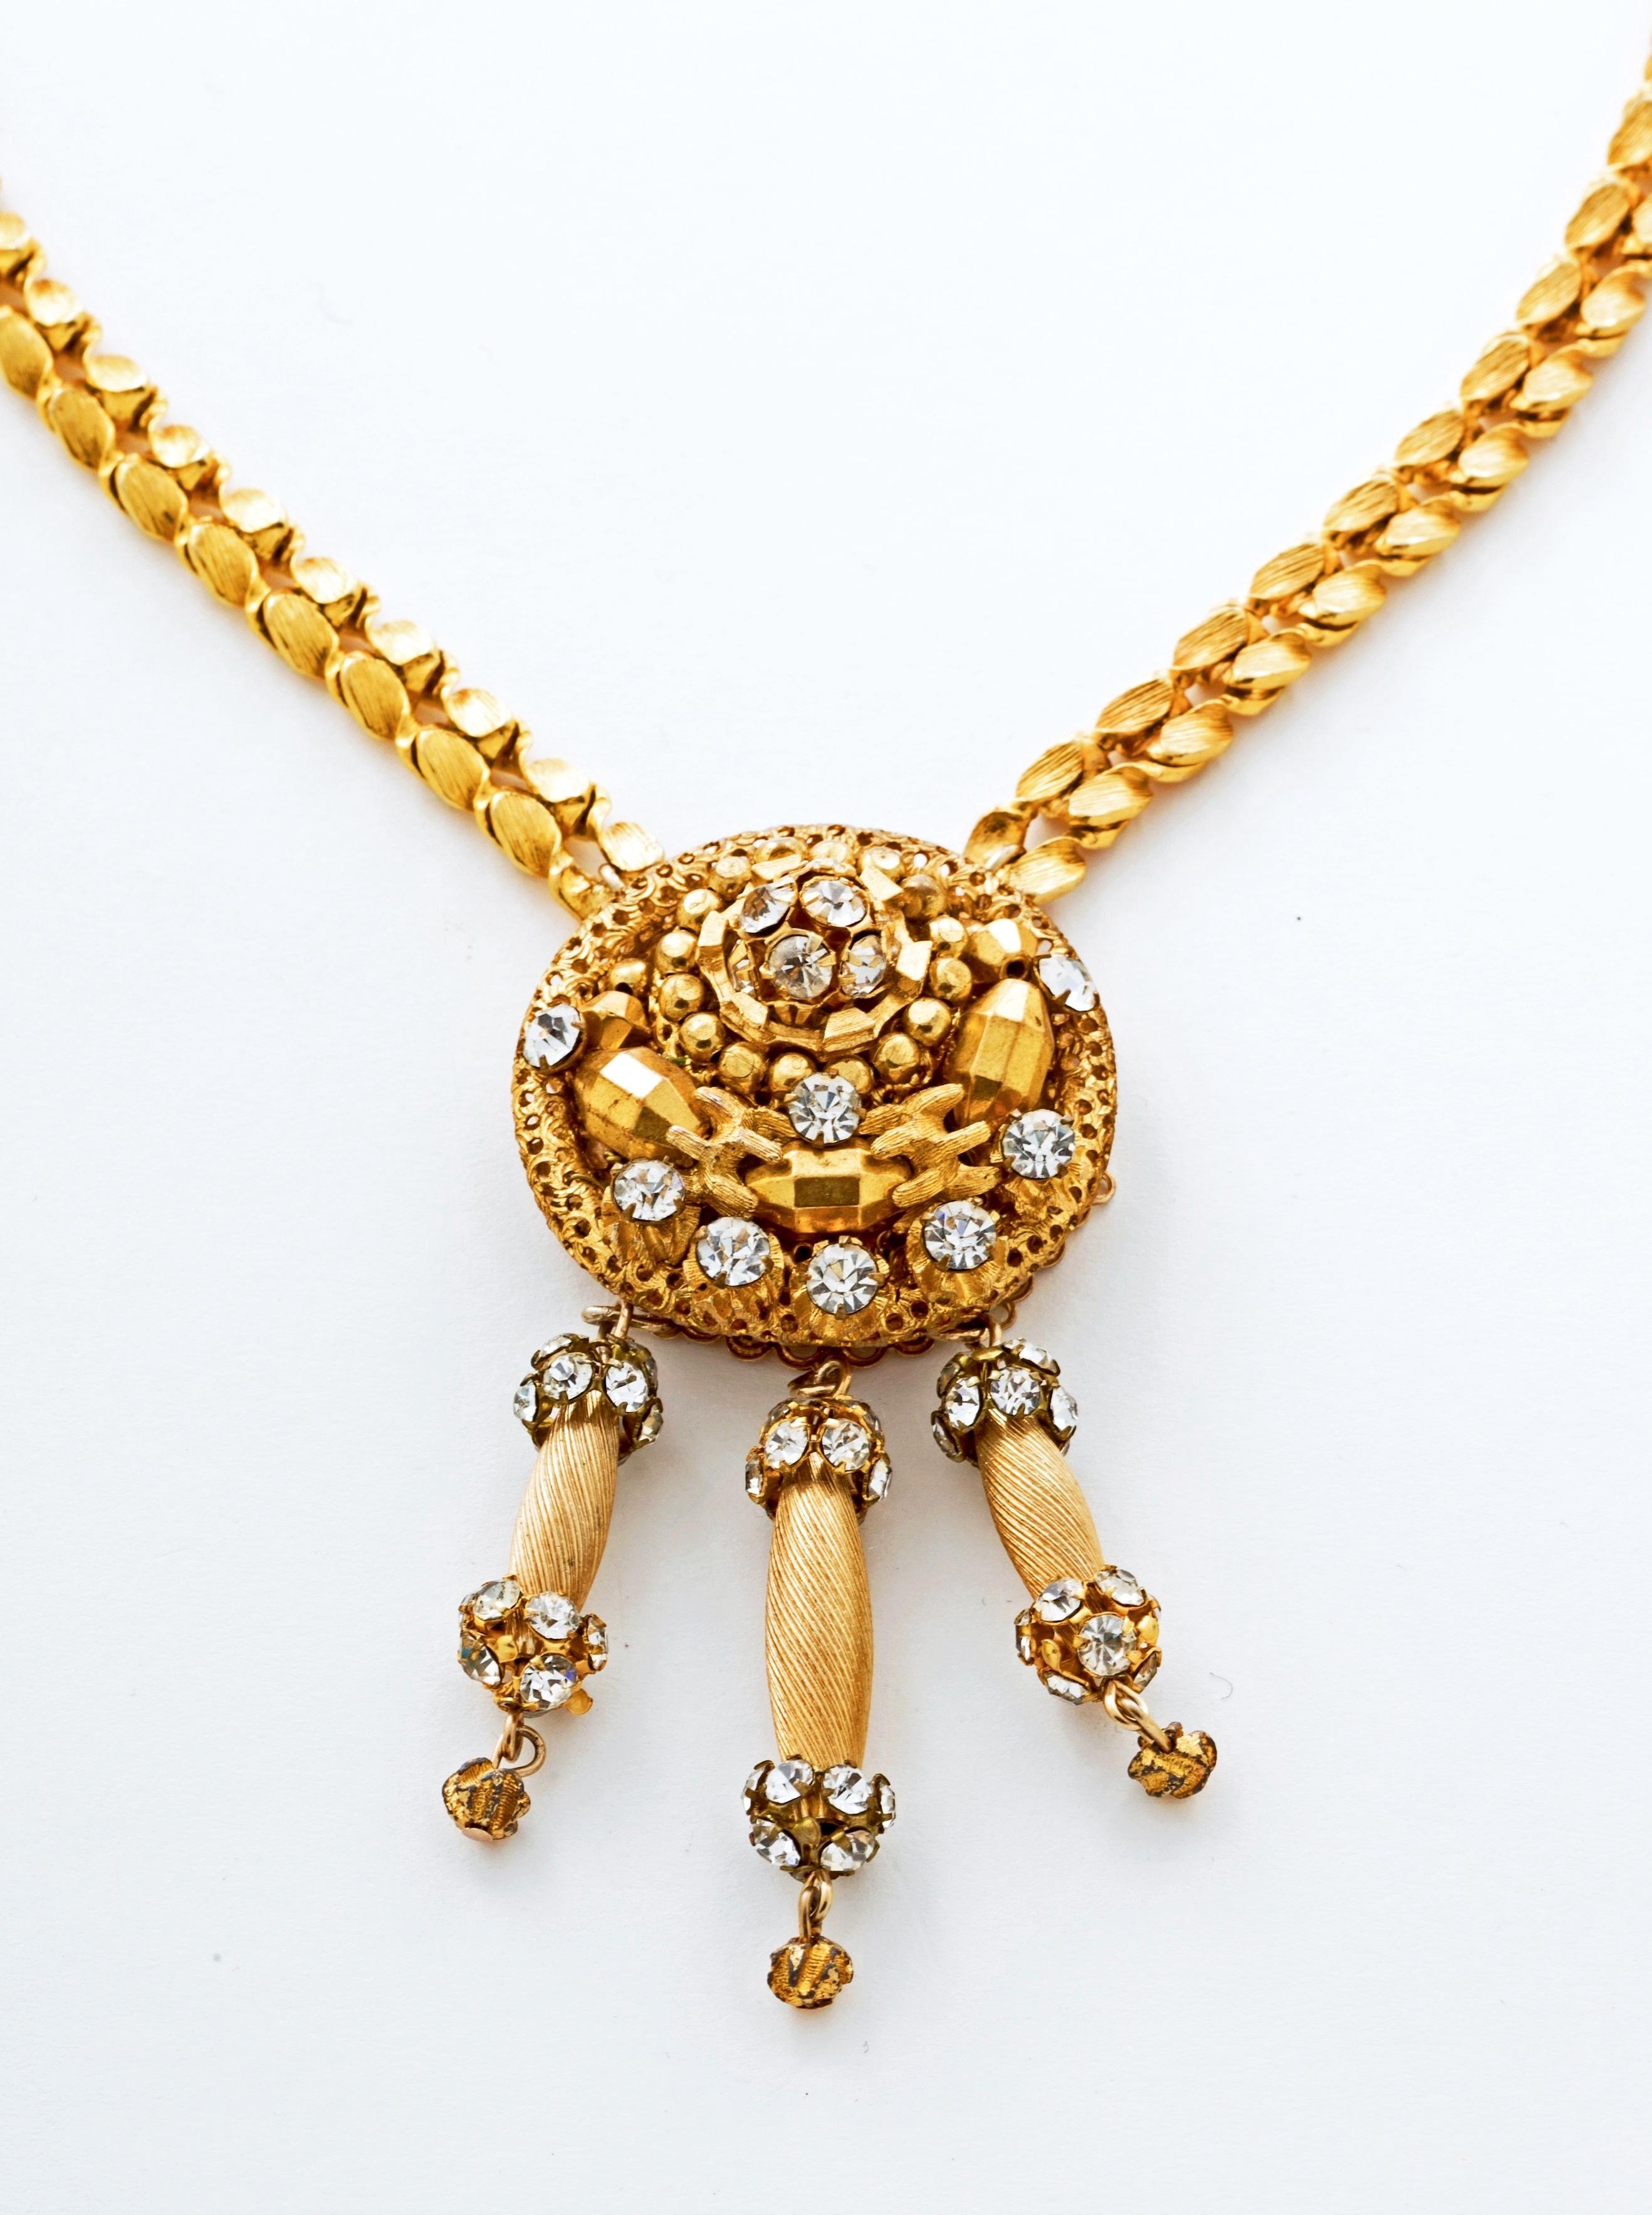 Stunning and Rare is this Vintage Hattie Carnegie Demi Parure.  Beautiful gold gilt metal and sparkling crystals make up this extraordinarily well designed necklace and matching earrings.  Both pieces are signed.  Note the earrings are clip but very